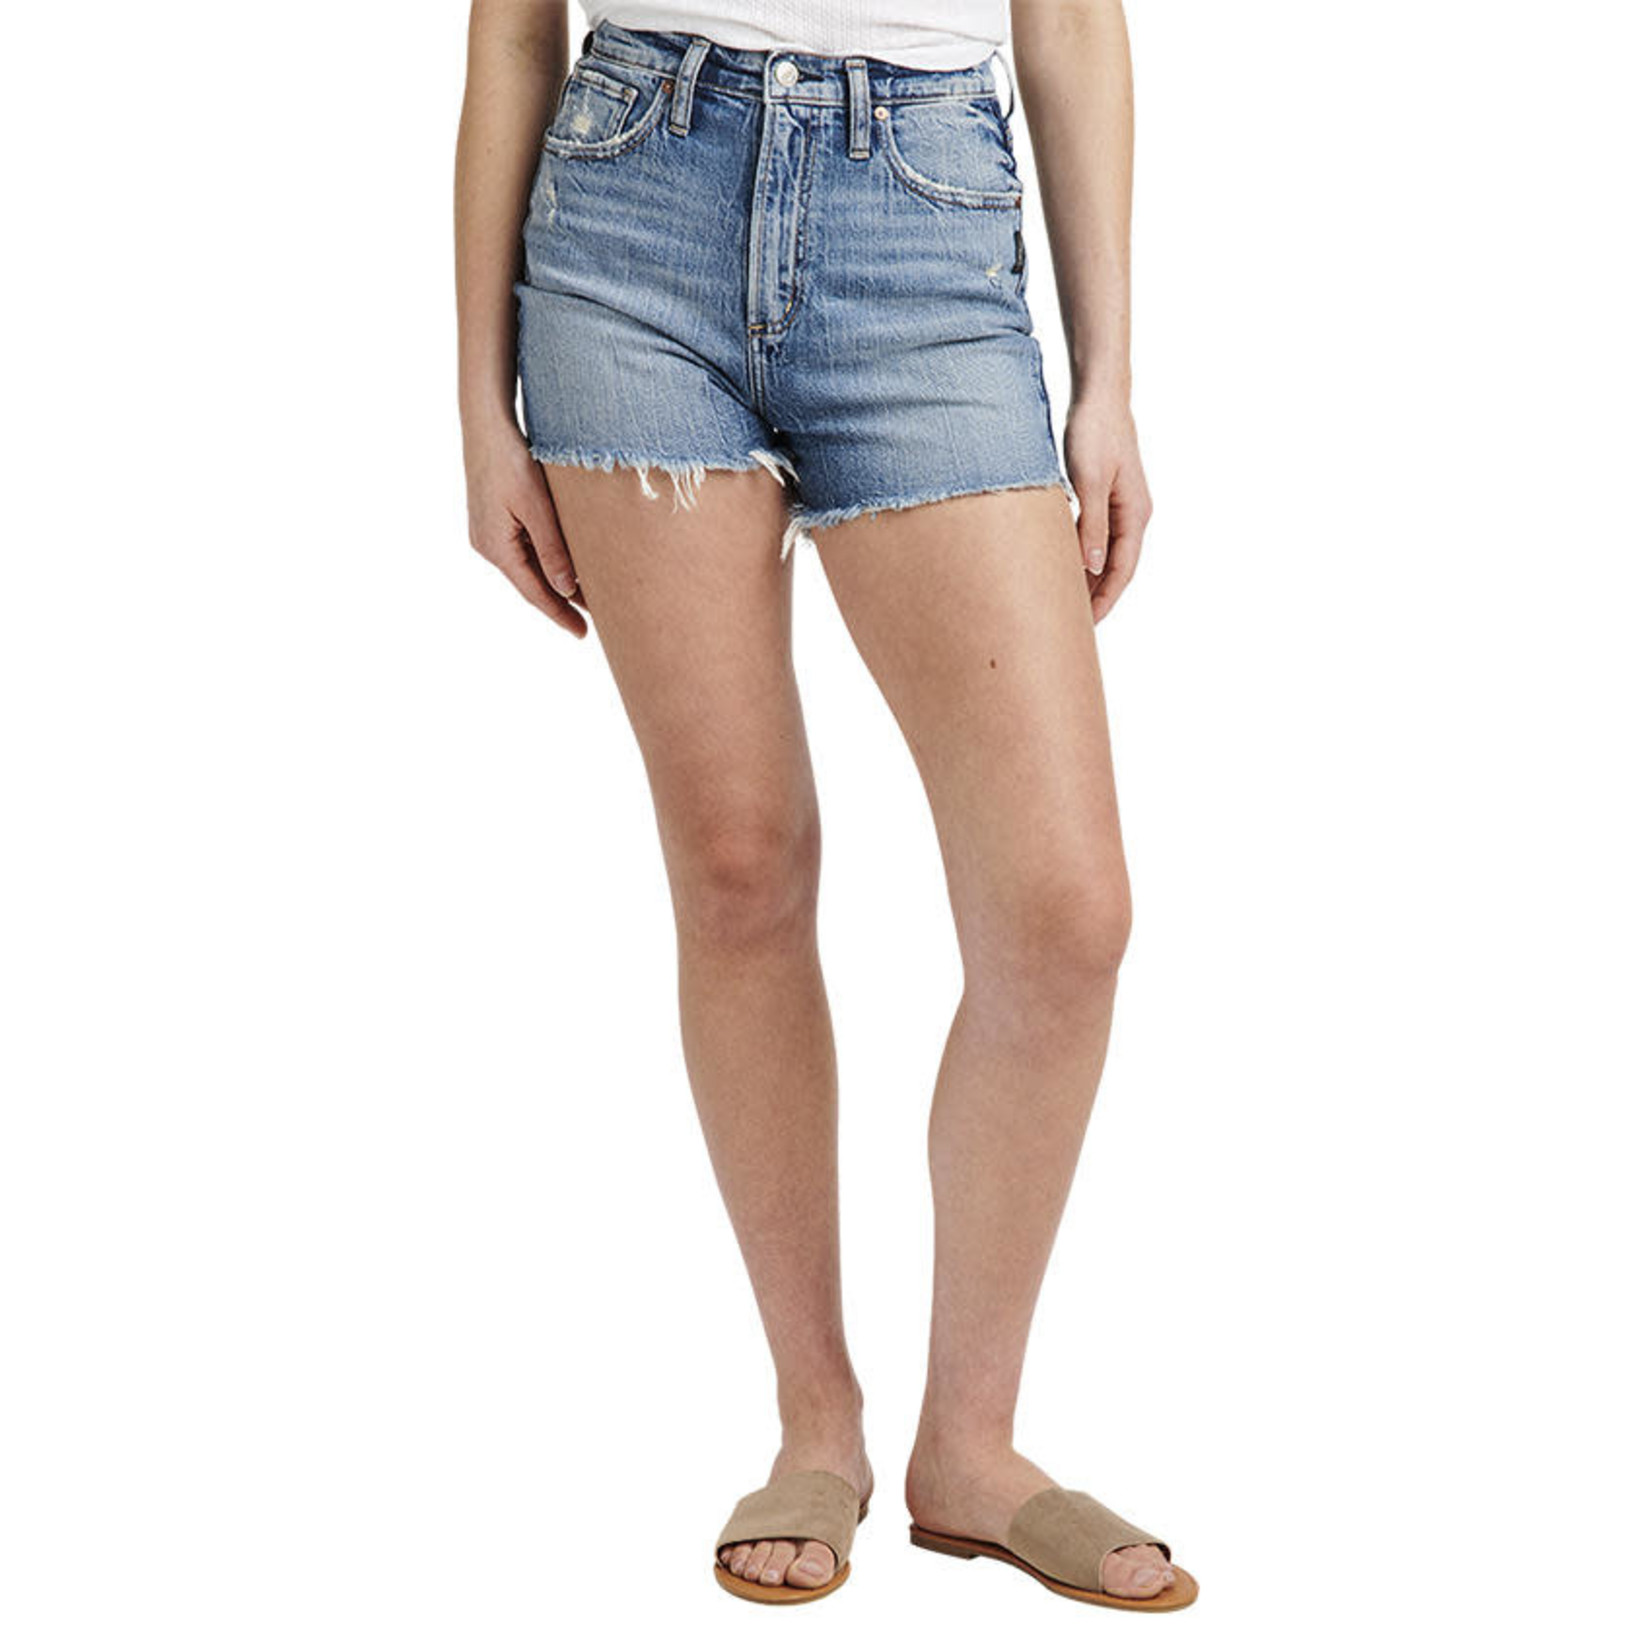 Silver Jeans Highly Desirable Short